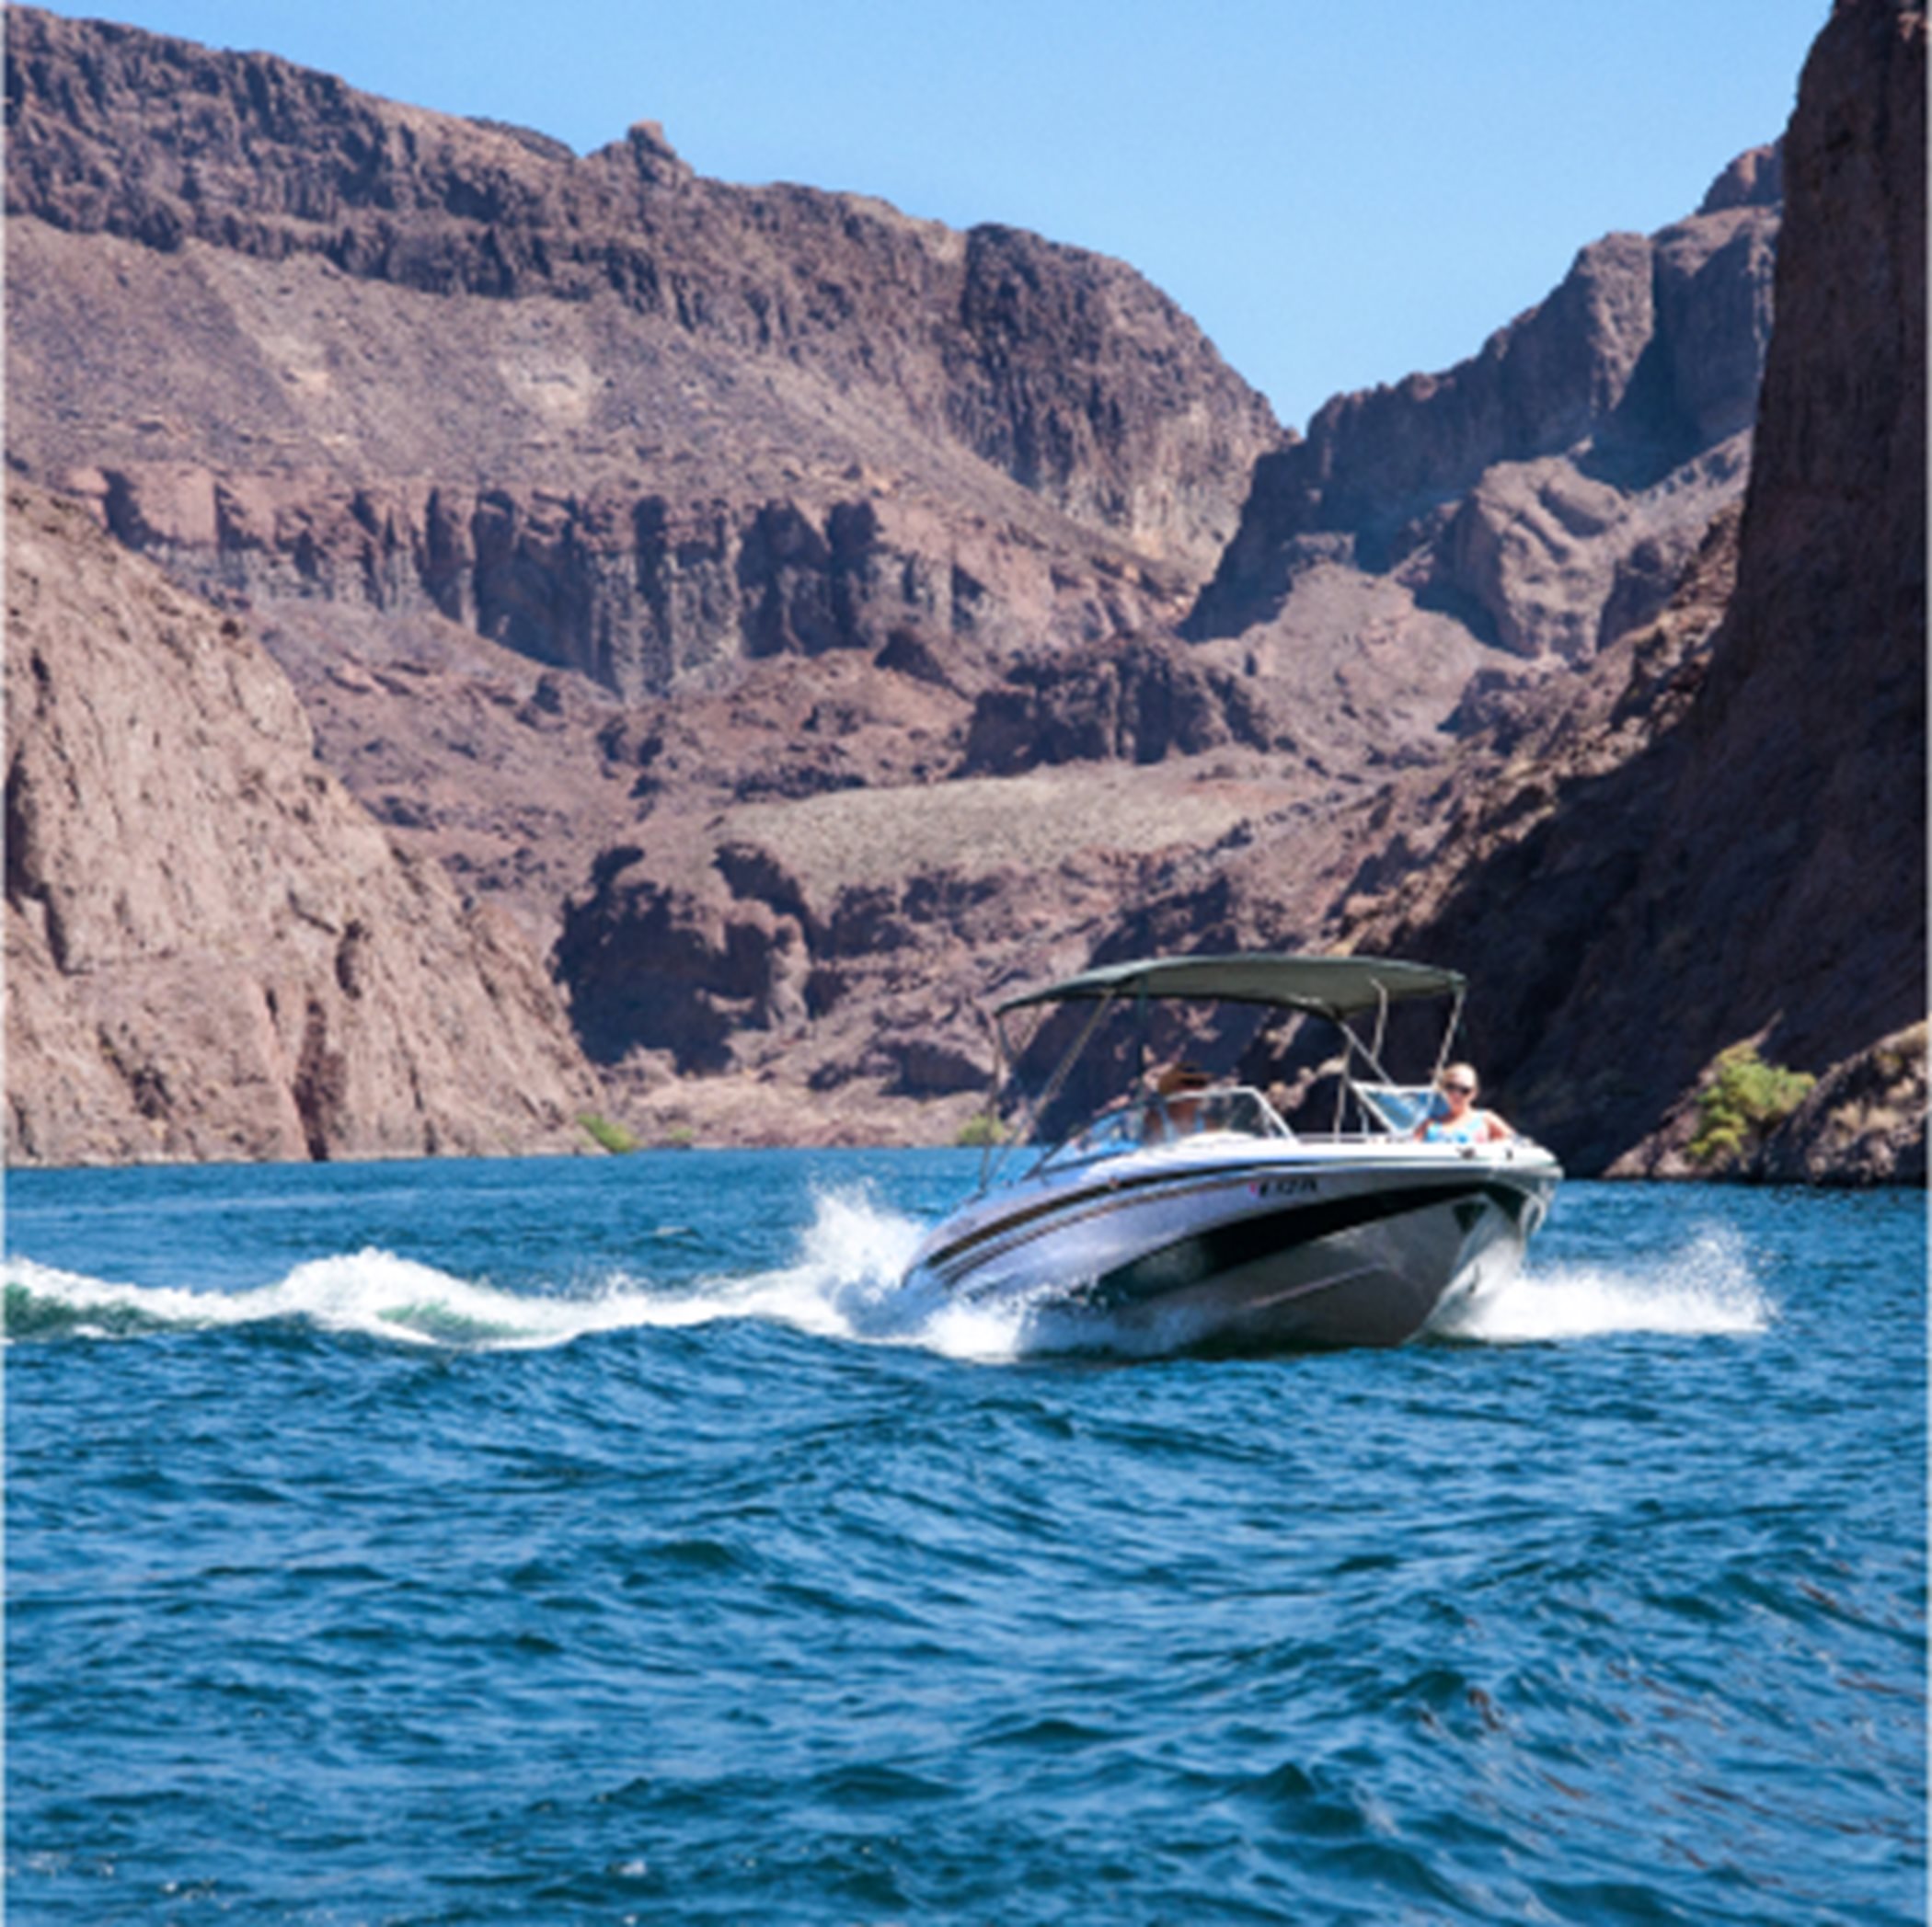 The McAuley Take your boat out on nearby Lake Mead